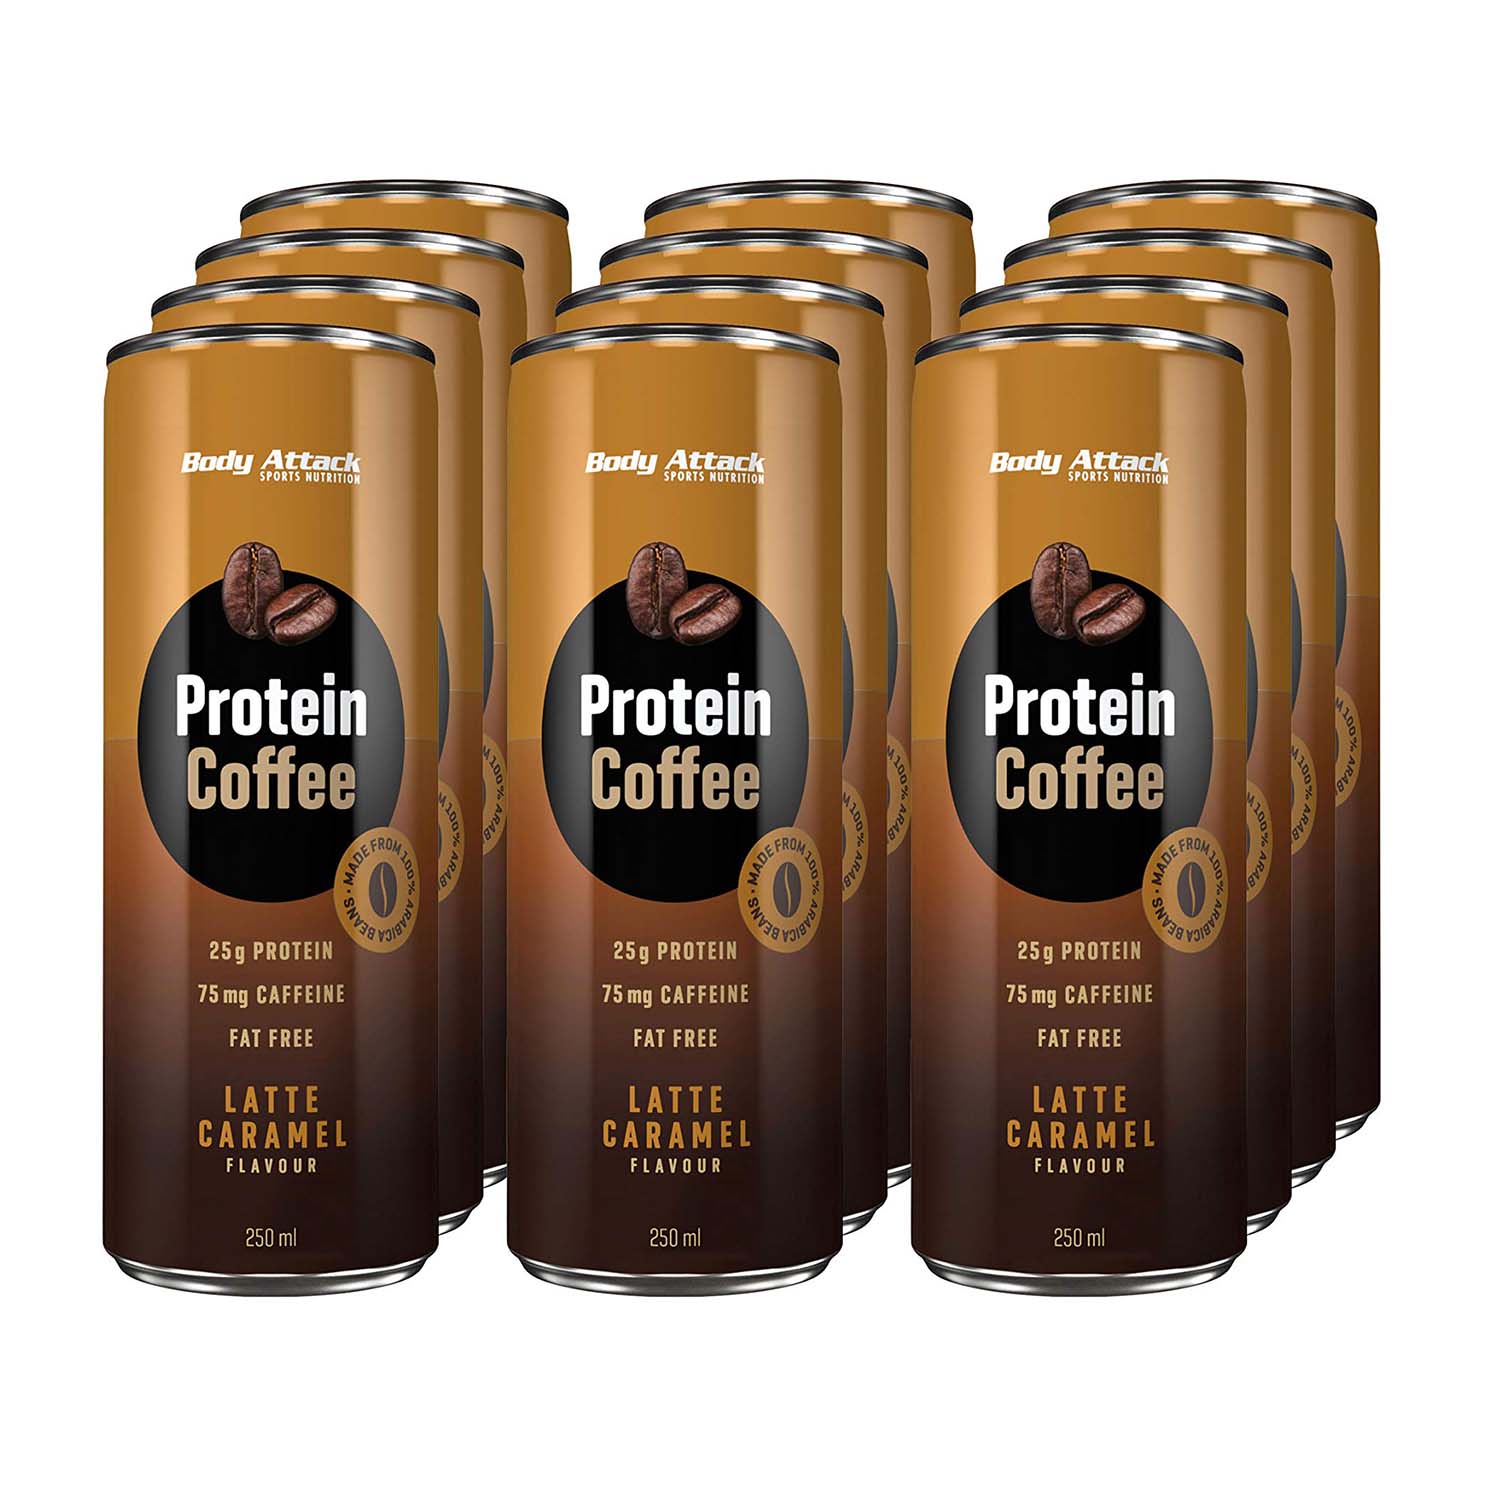 Body Attack Protein Coffee Box of 12 Pieces Latte Caramel